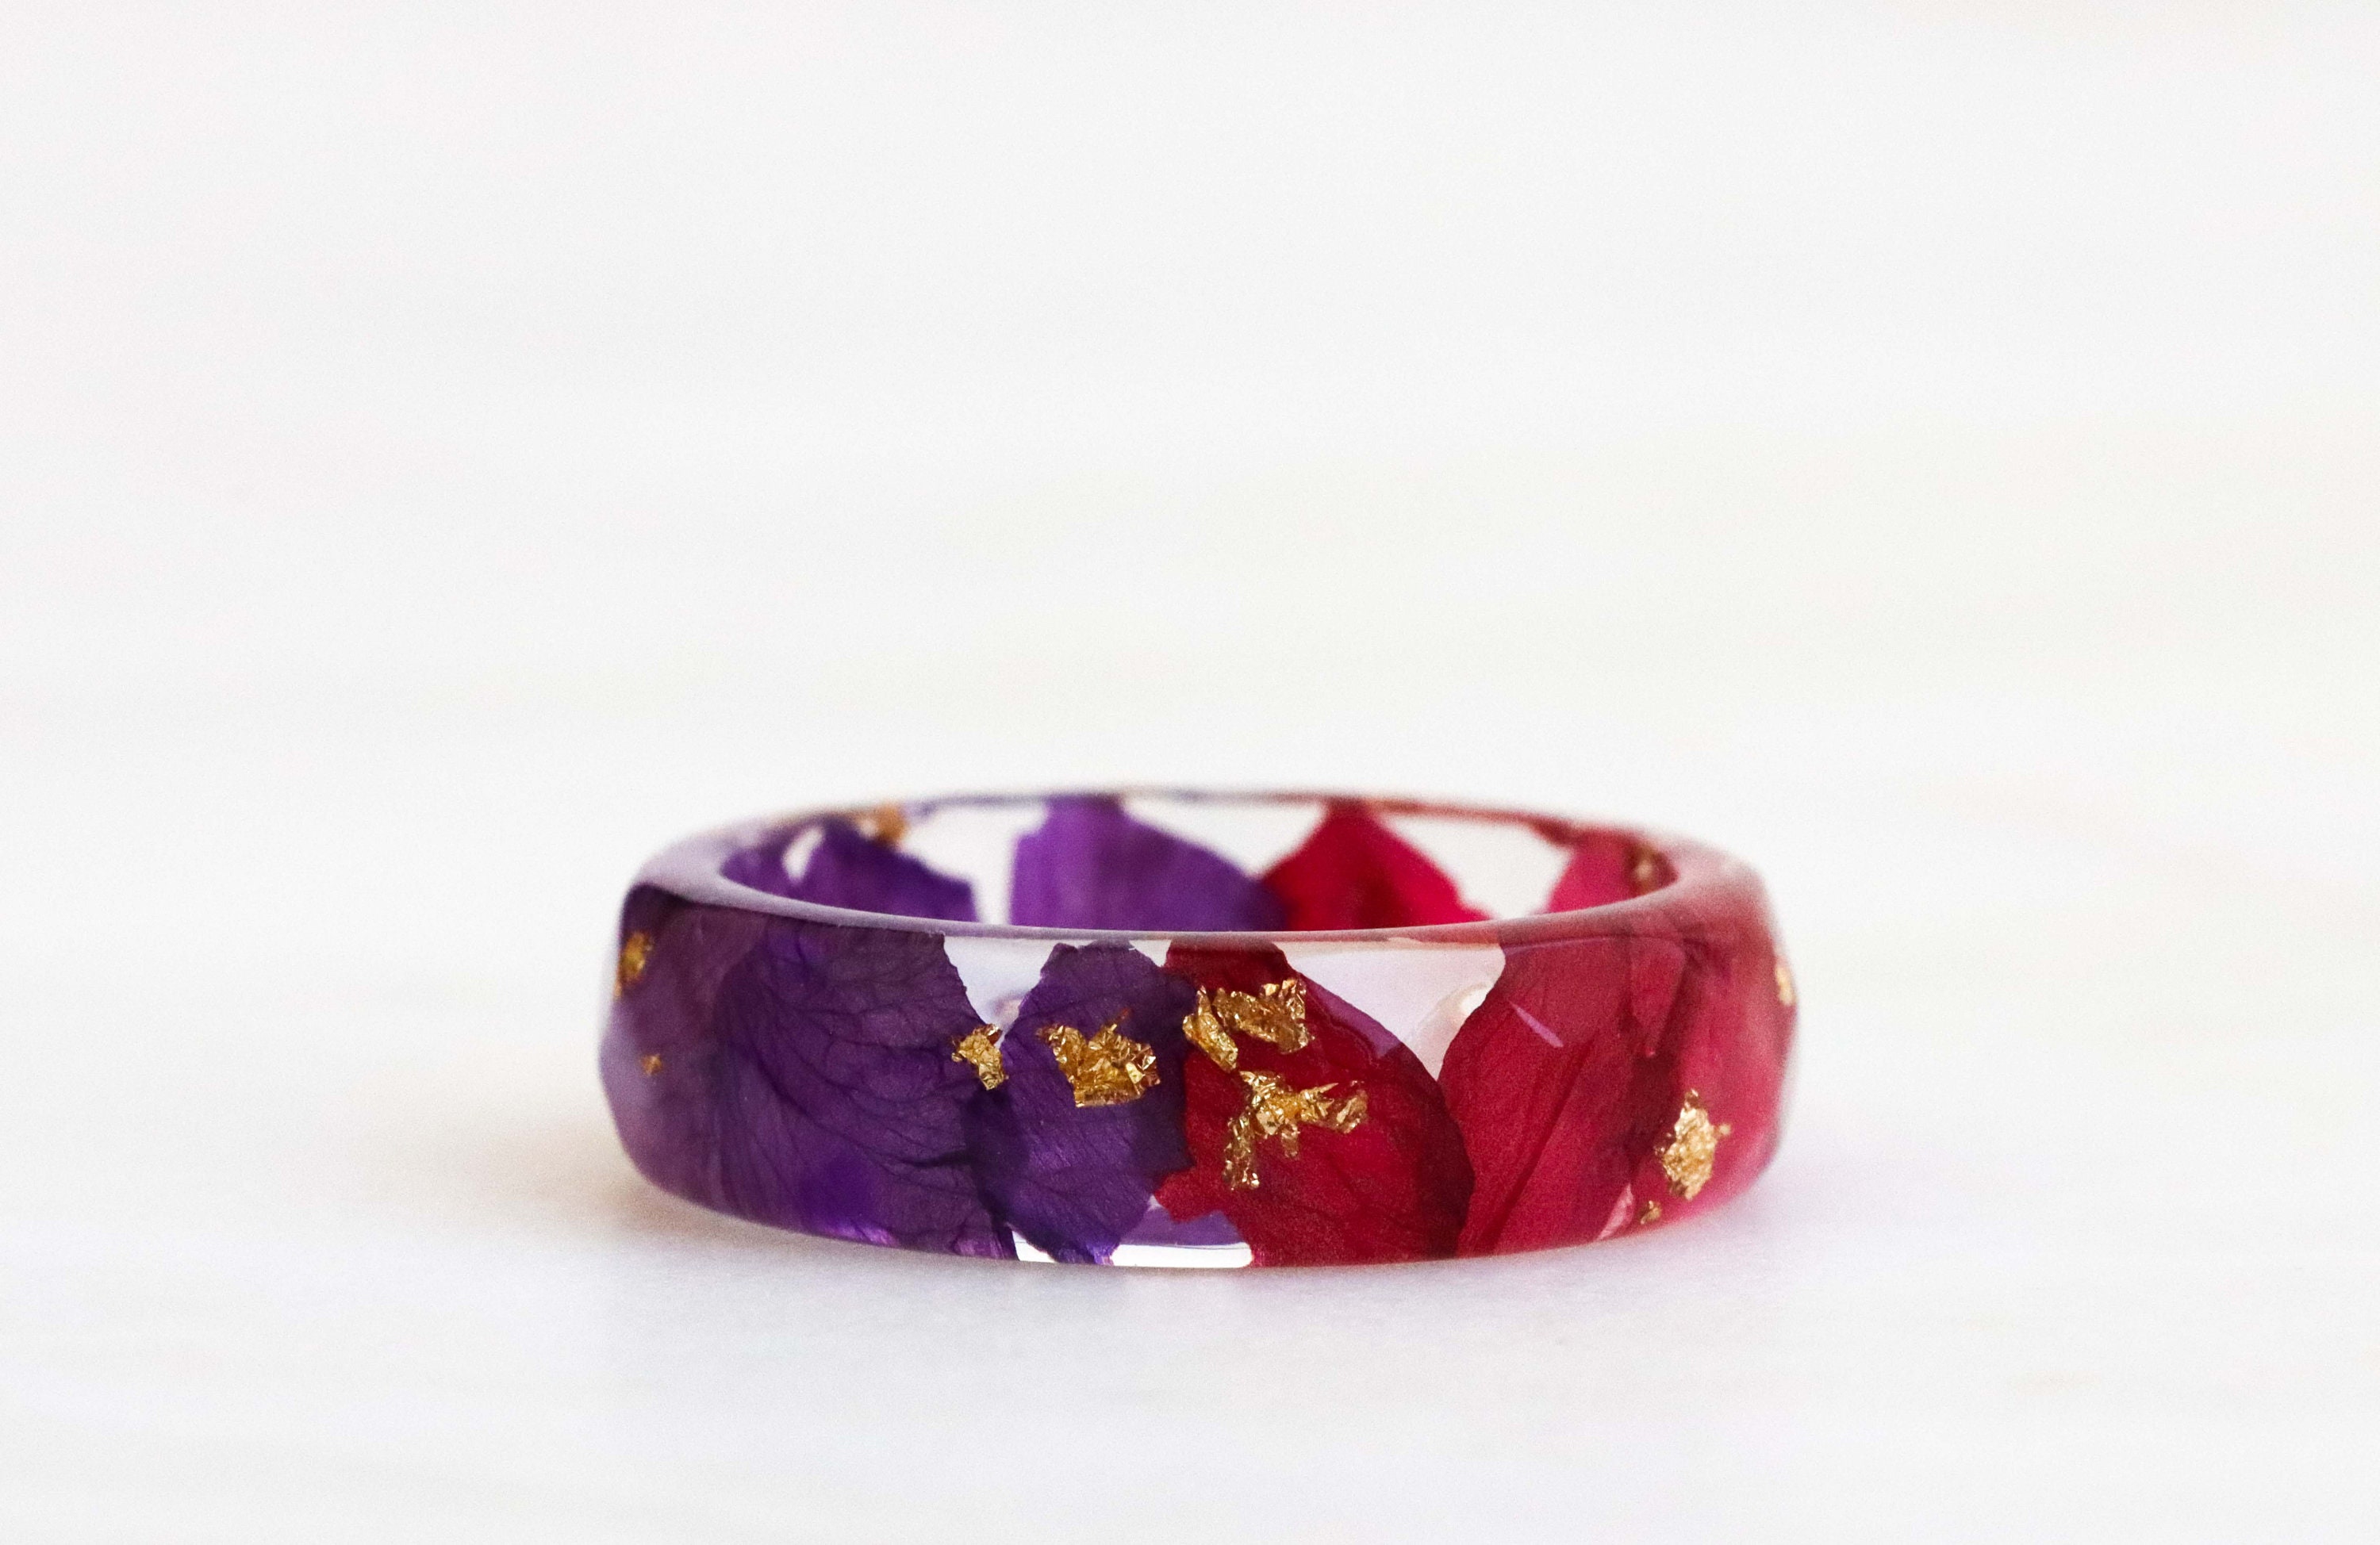 Real Dried Flowers and Resin Bracelet, Rose Gold in Red Orange Yellow Mix OTHER/message Seller